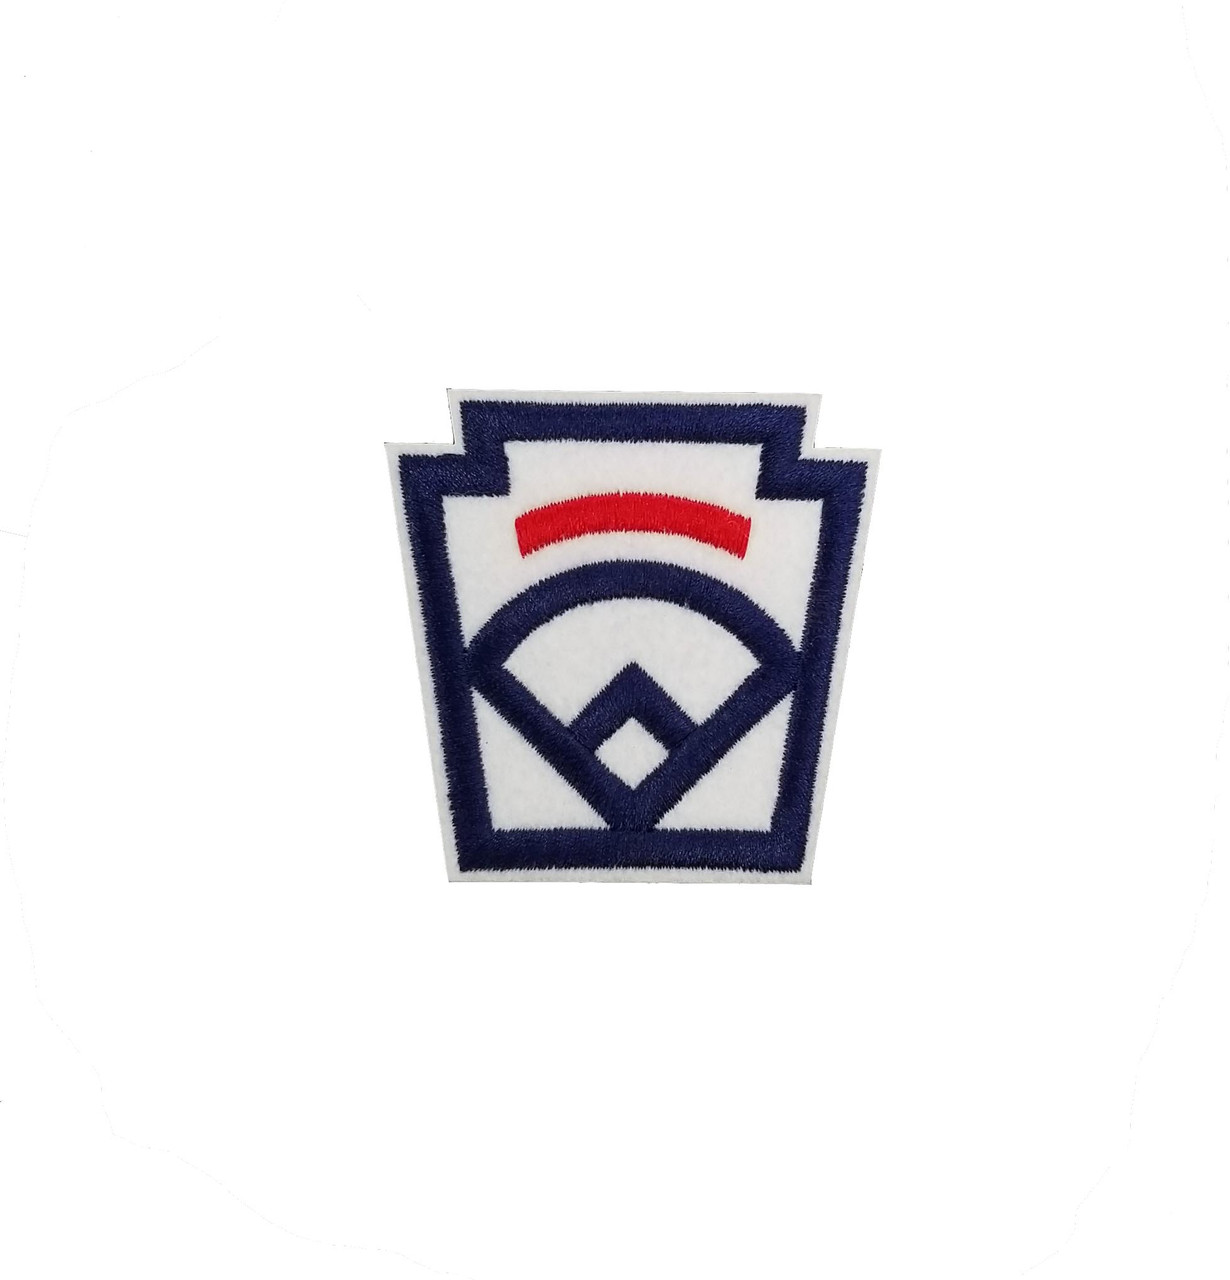 Updated Guidance on Patches for 2021 Tournament Play - Little League